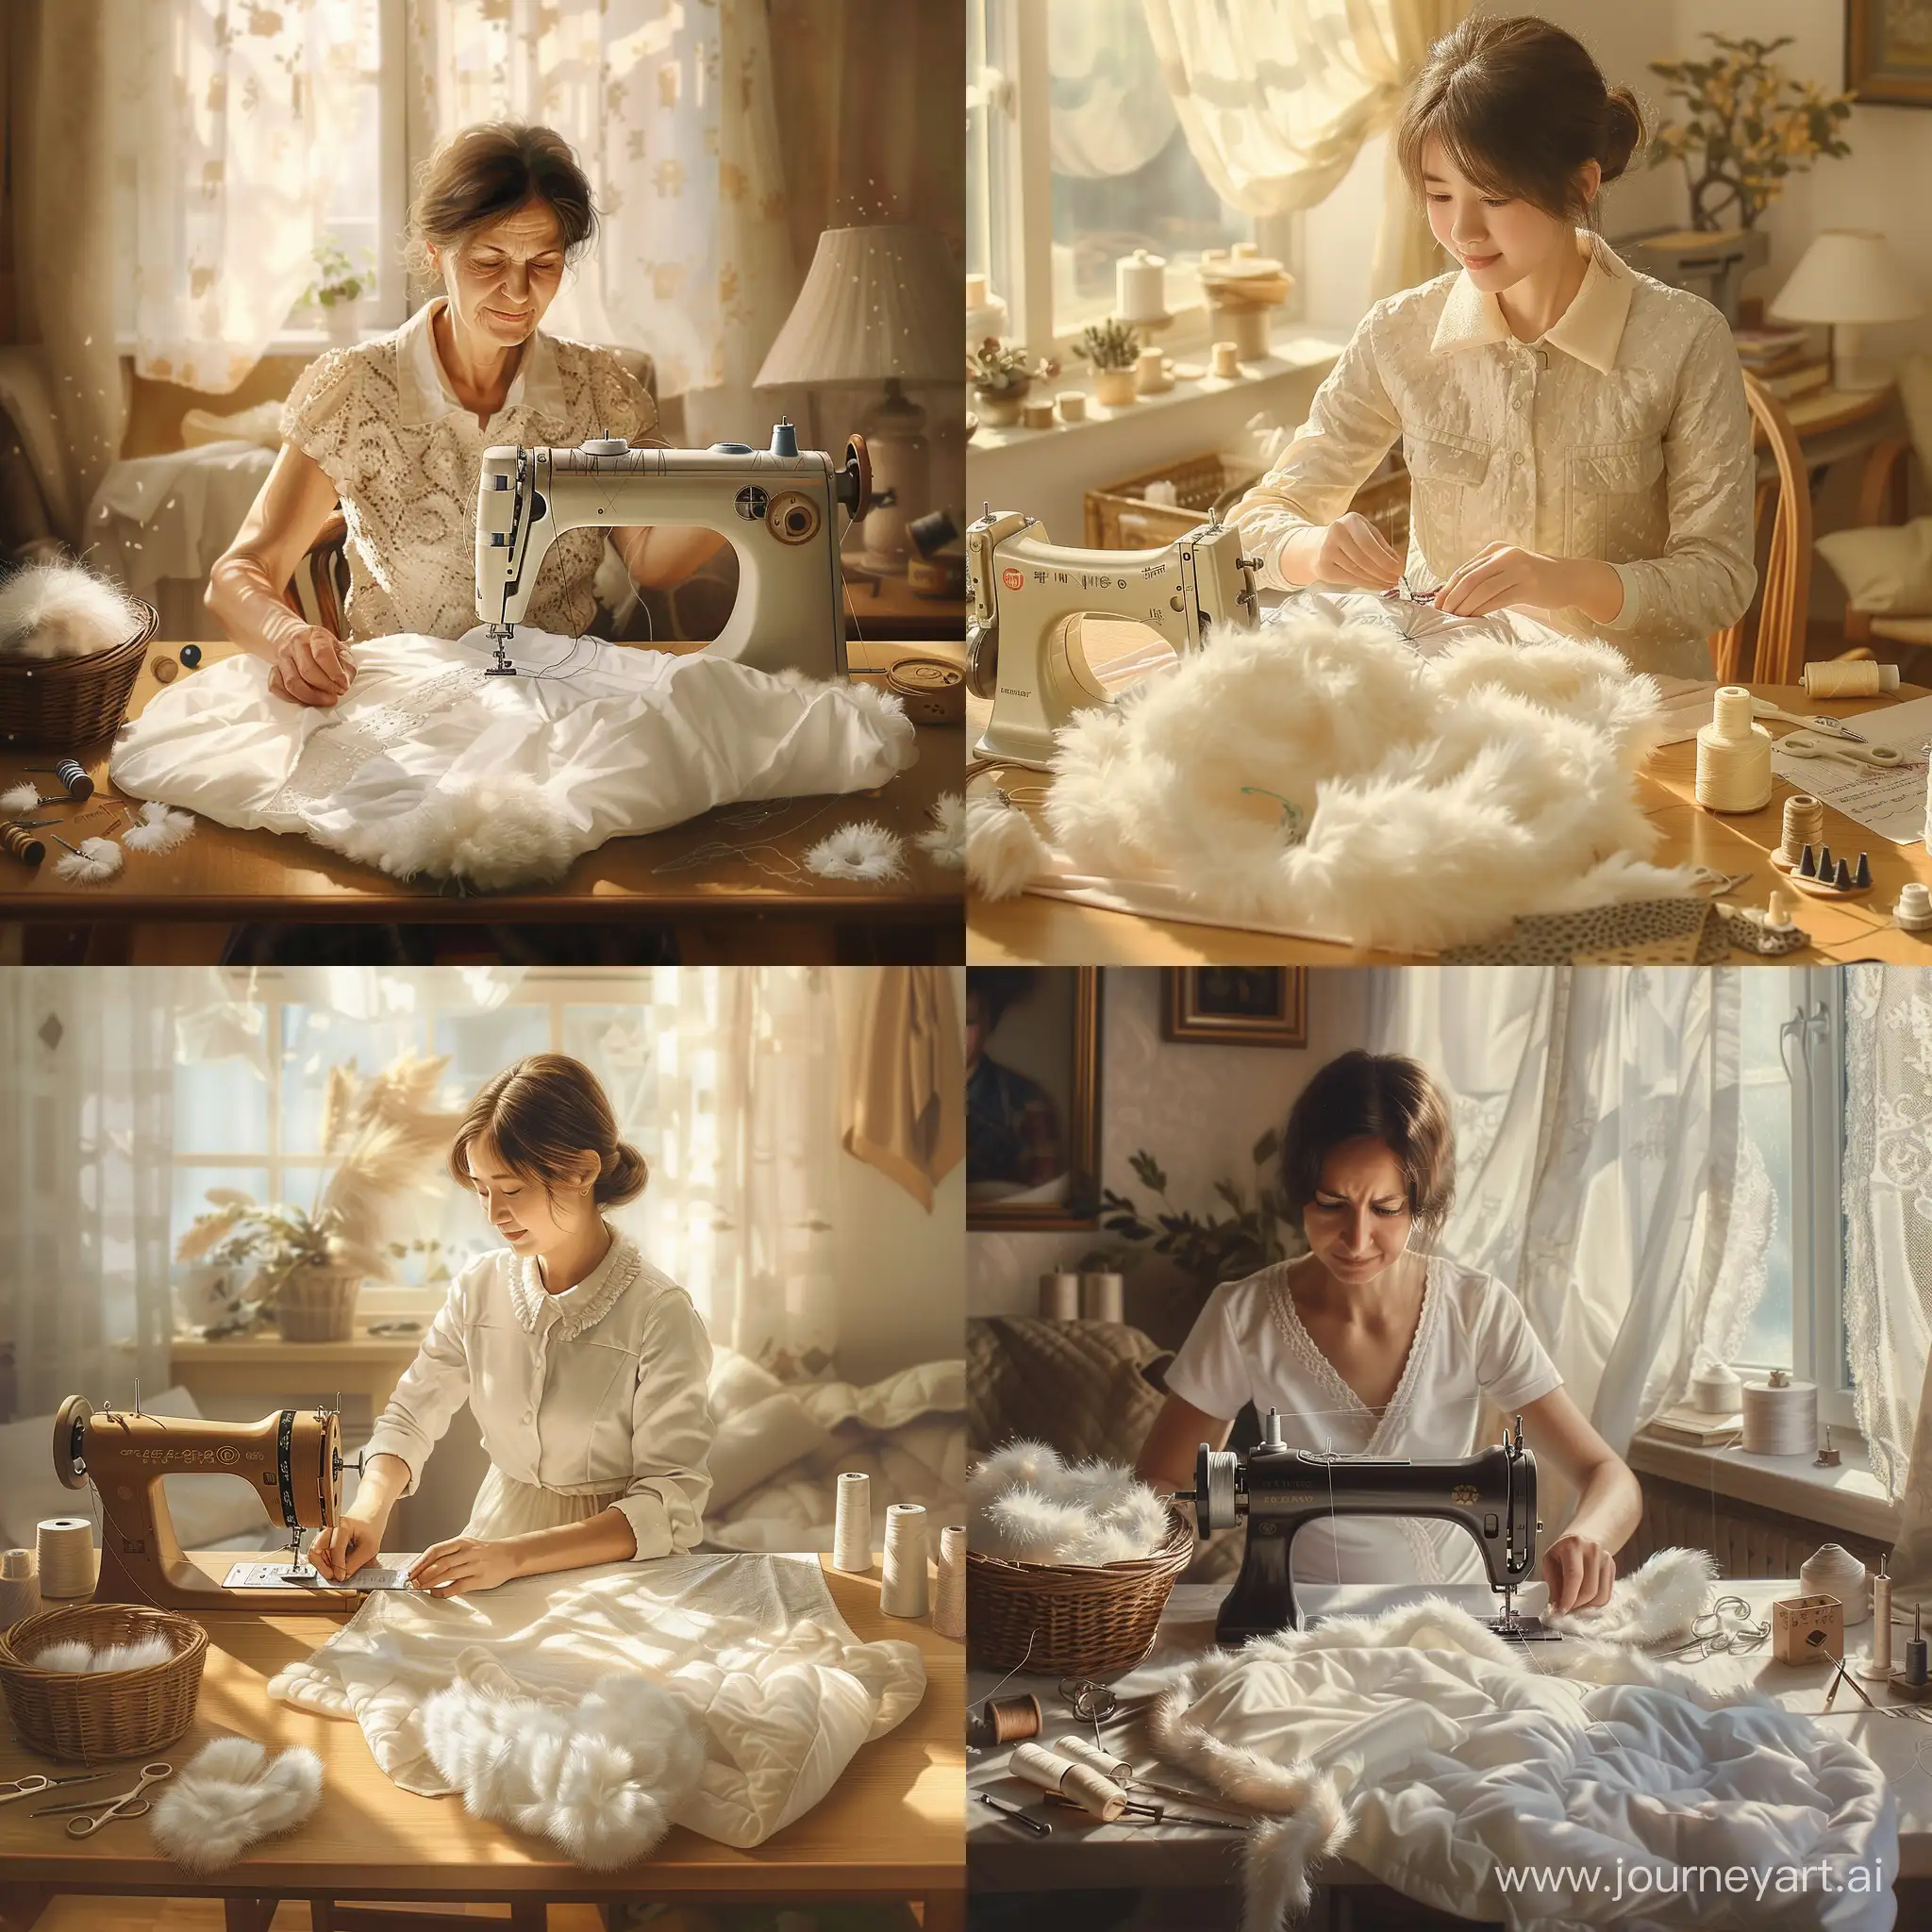 On a tranquil afternoon, sunlight streamed through the window, casting a soft glow on the tidy and bright living room. A mother sat at the table, her sewing machine humming gently, emitting a rhythmic sound. She focused intently on the delicate needlework beneath the sewing machine, skillfully manipulating the fabric with her nimble hands.  A pile of fluffy down feathers lay on the table, shimmering in the ambient light. The mother reached into a nearby basket, retrieving a pre-cut piece of satin fabric. She delicately traced the patterns for the collar, cuffs, and front of the garment. Her eyes revealed a profound expertise and experience in the task at hand.  The soothing hum of the sewing machine accompanied her every move, creating a melody as if in harmony with her actions. With practiced precision, she sewed the fabric along the designated lines, each stitch flowing seamlessly like a gentle stream. Her fingers danced gracefully, orchestrating a dance as if in sync with the machine.  As time passed, the down jacket gradually took shape under her skilled hands. The mother furrowed her brow slightly, pausing at intervals to inspect every detail, ensuring perfection in every stitch. A content smile played on her face, knowing that this garment would bring warmth to her family.  Around her, scattered pieces of cut fabric, embroidery needles, thread spools, and other sewing tools painted a picture of domestic tranquility. The scene exuded a sense of peace and the warmth of home, with the mother's craft and dedication serving as the guarantee for a cozy winter for her loved ones.